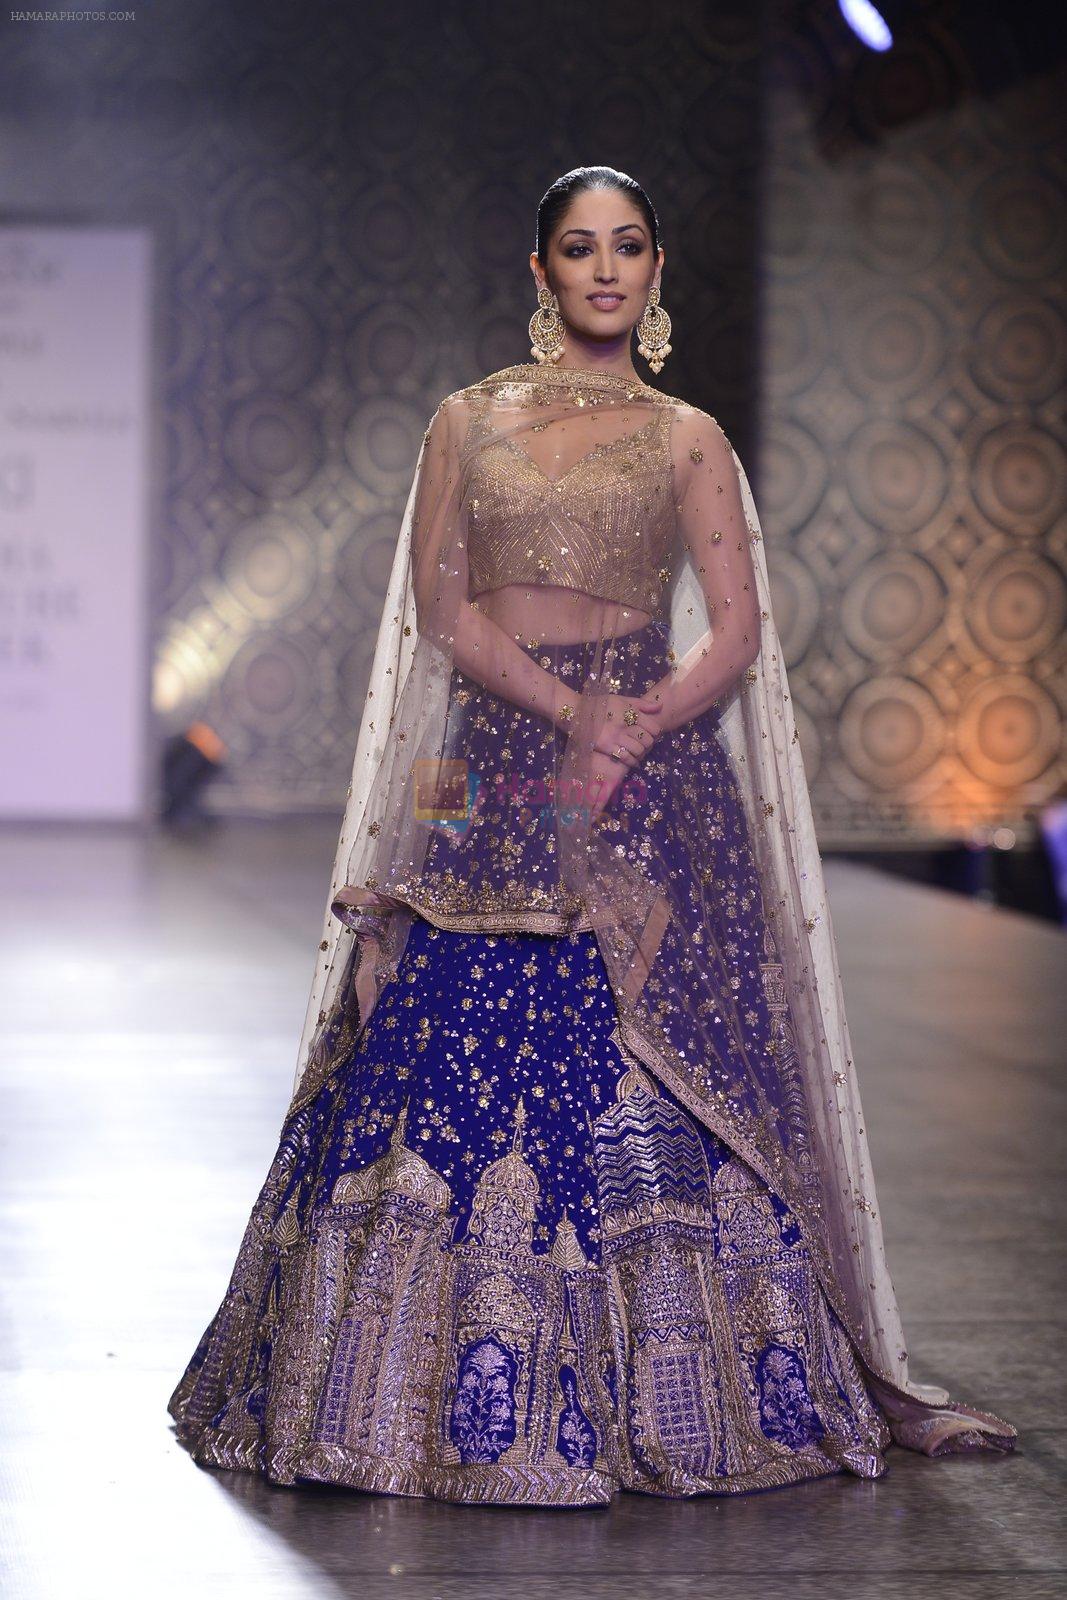 Yami Gautam walks the ramp for Rimple and Harpreet Narula at the FDCI India Couture Week 2016 on 22 July 2016